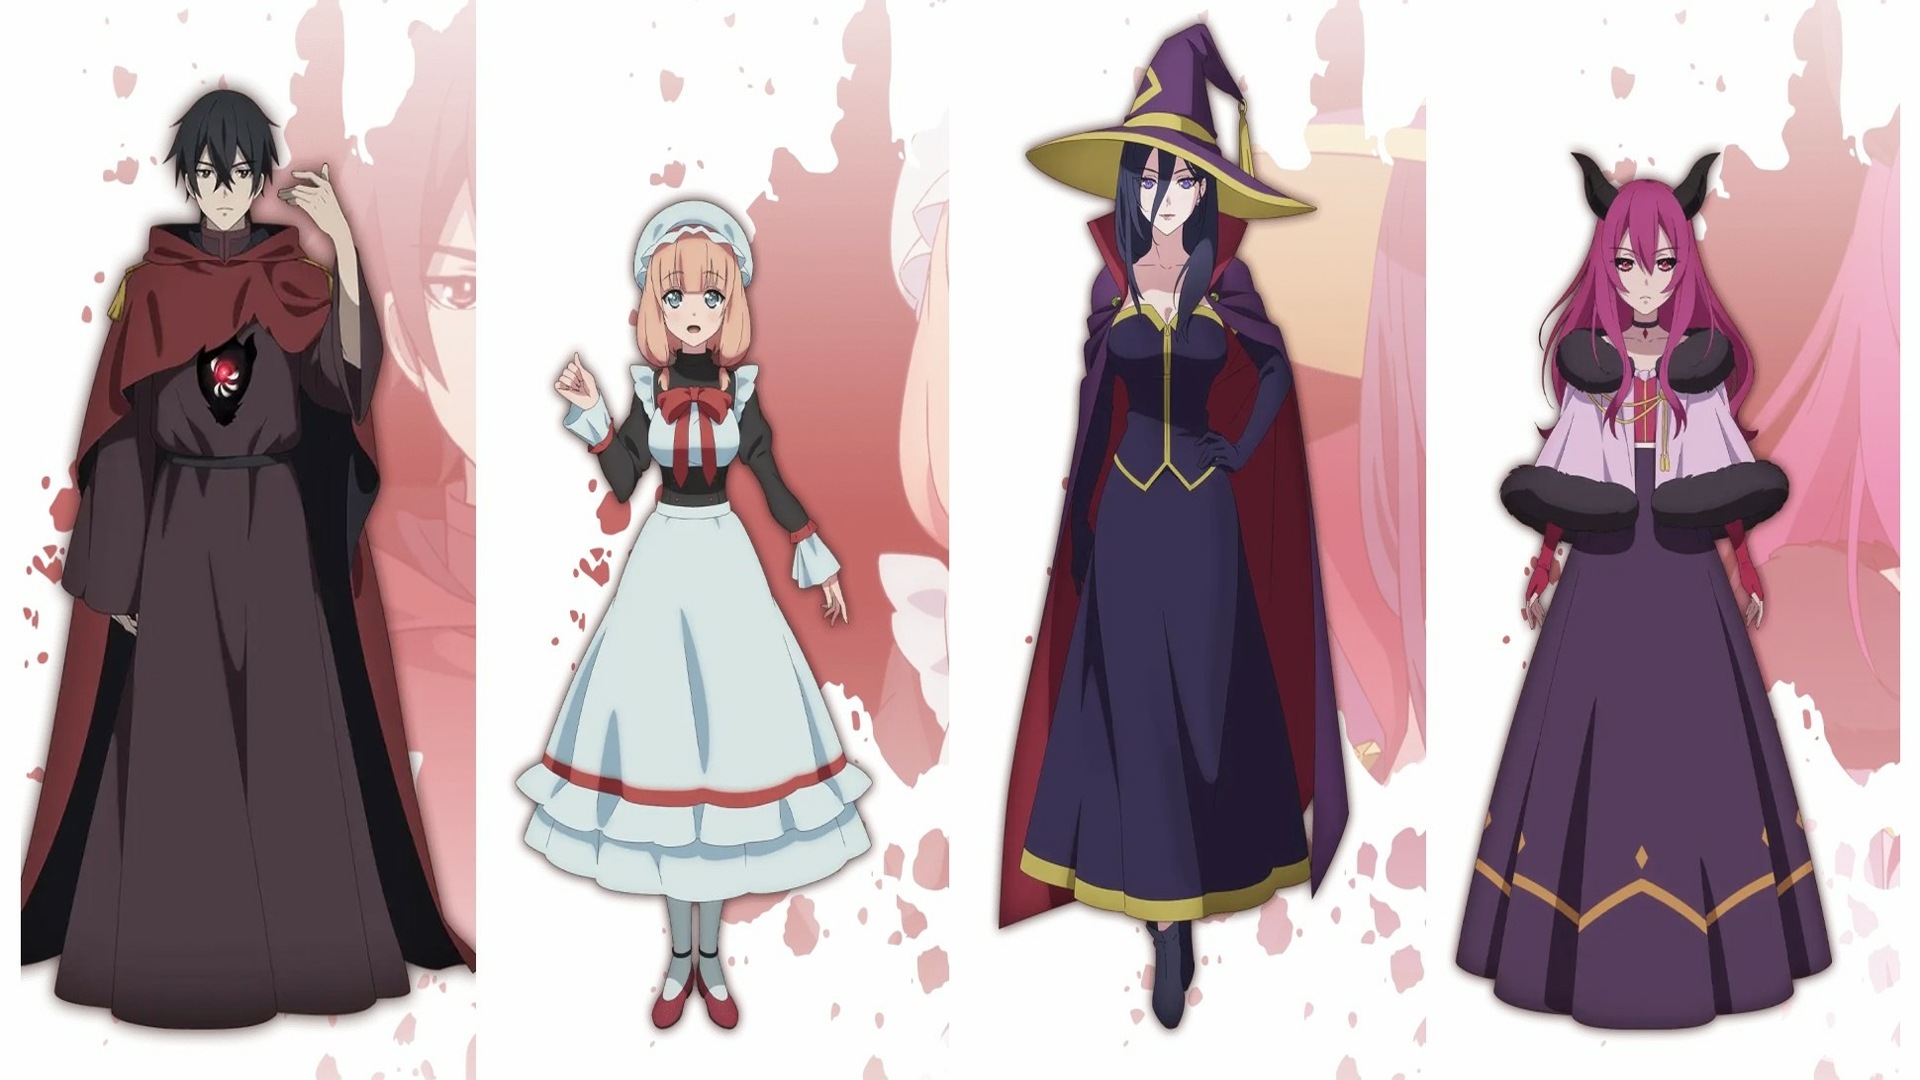 The Main Characters In The Strongest Magician in the Demon Lord's Army - Ike, Satie, Cefiro, And Dairokuten Respectively (Studio A-CAT)